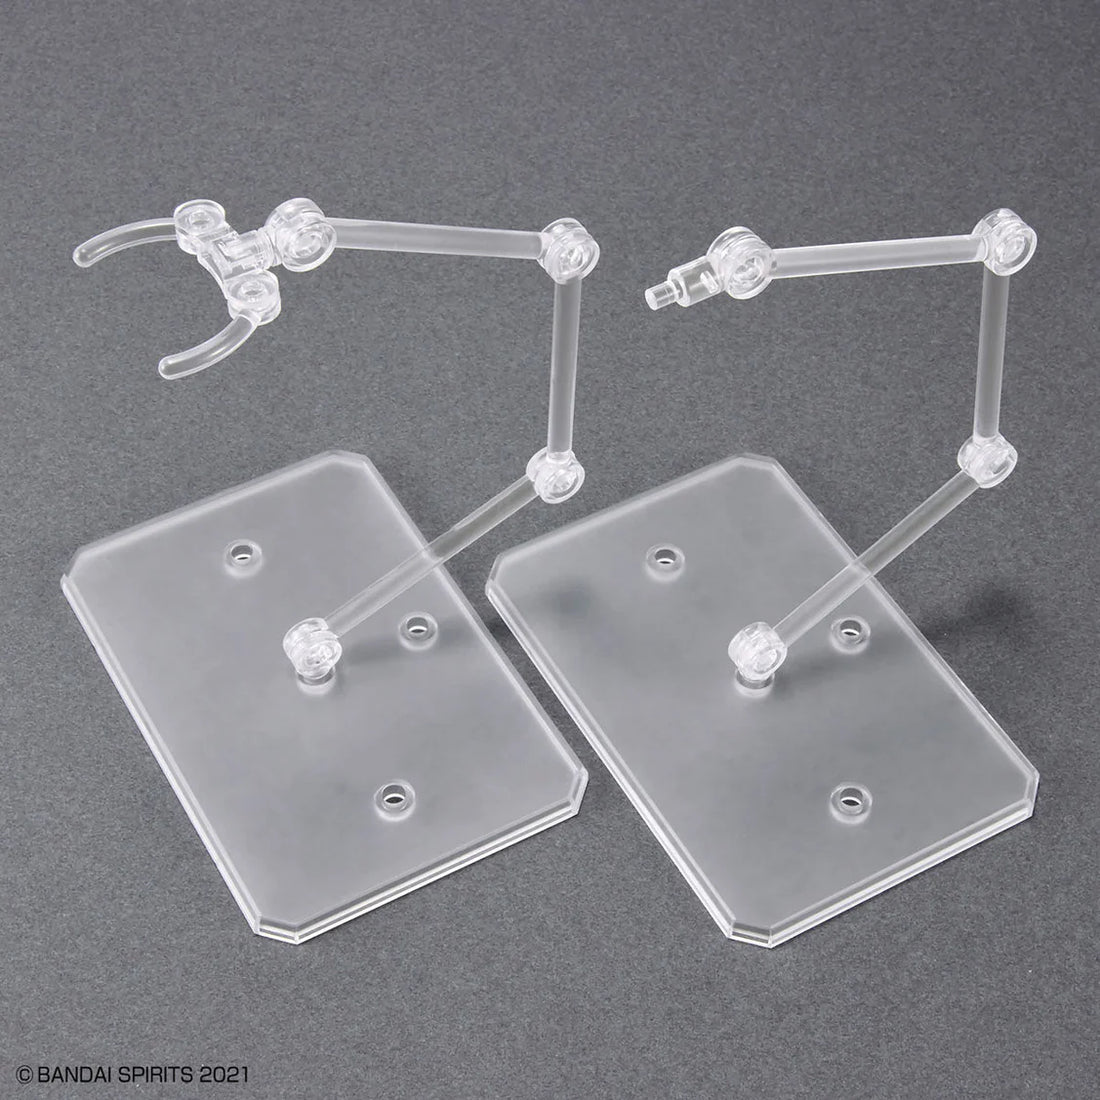 Action Base 6 [Clear Color] - Gundam Extra-Your BEST Gunpla Supplier